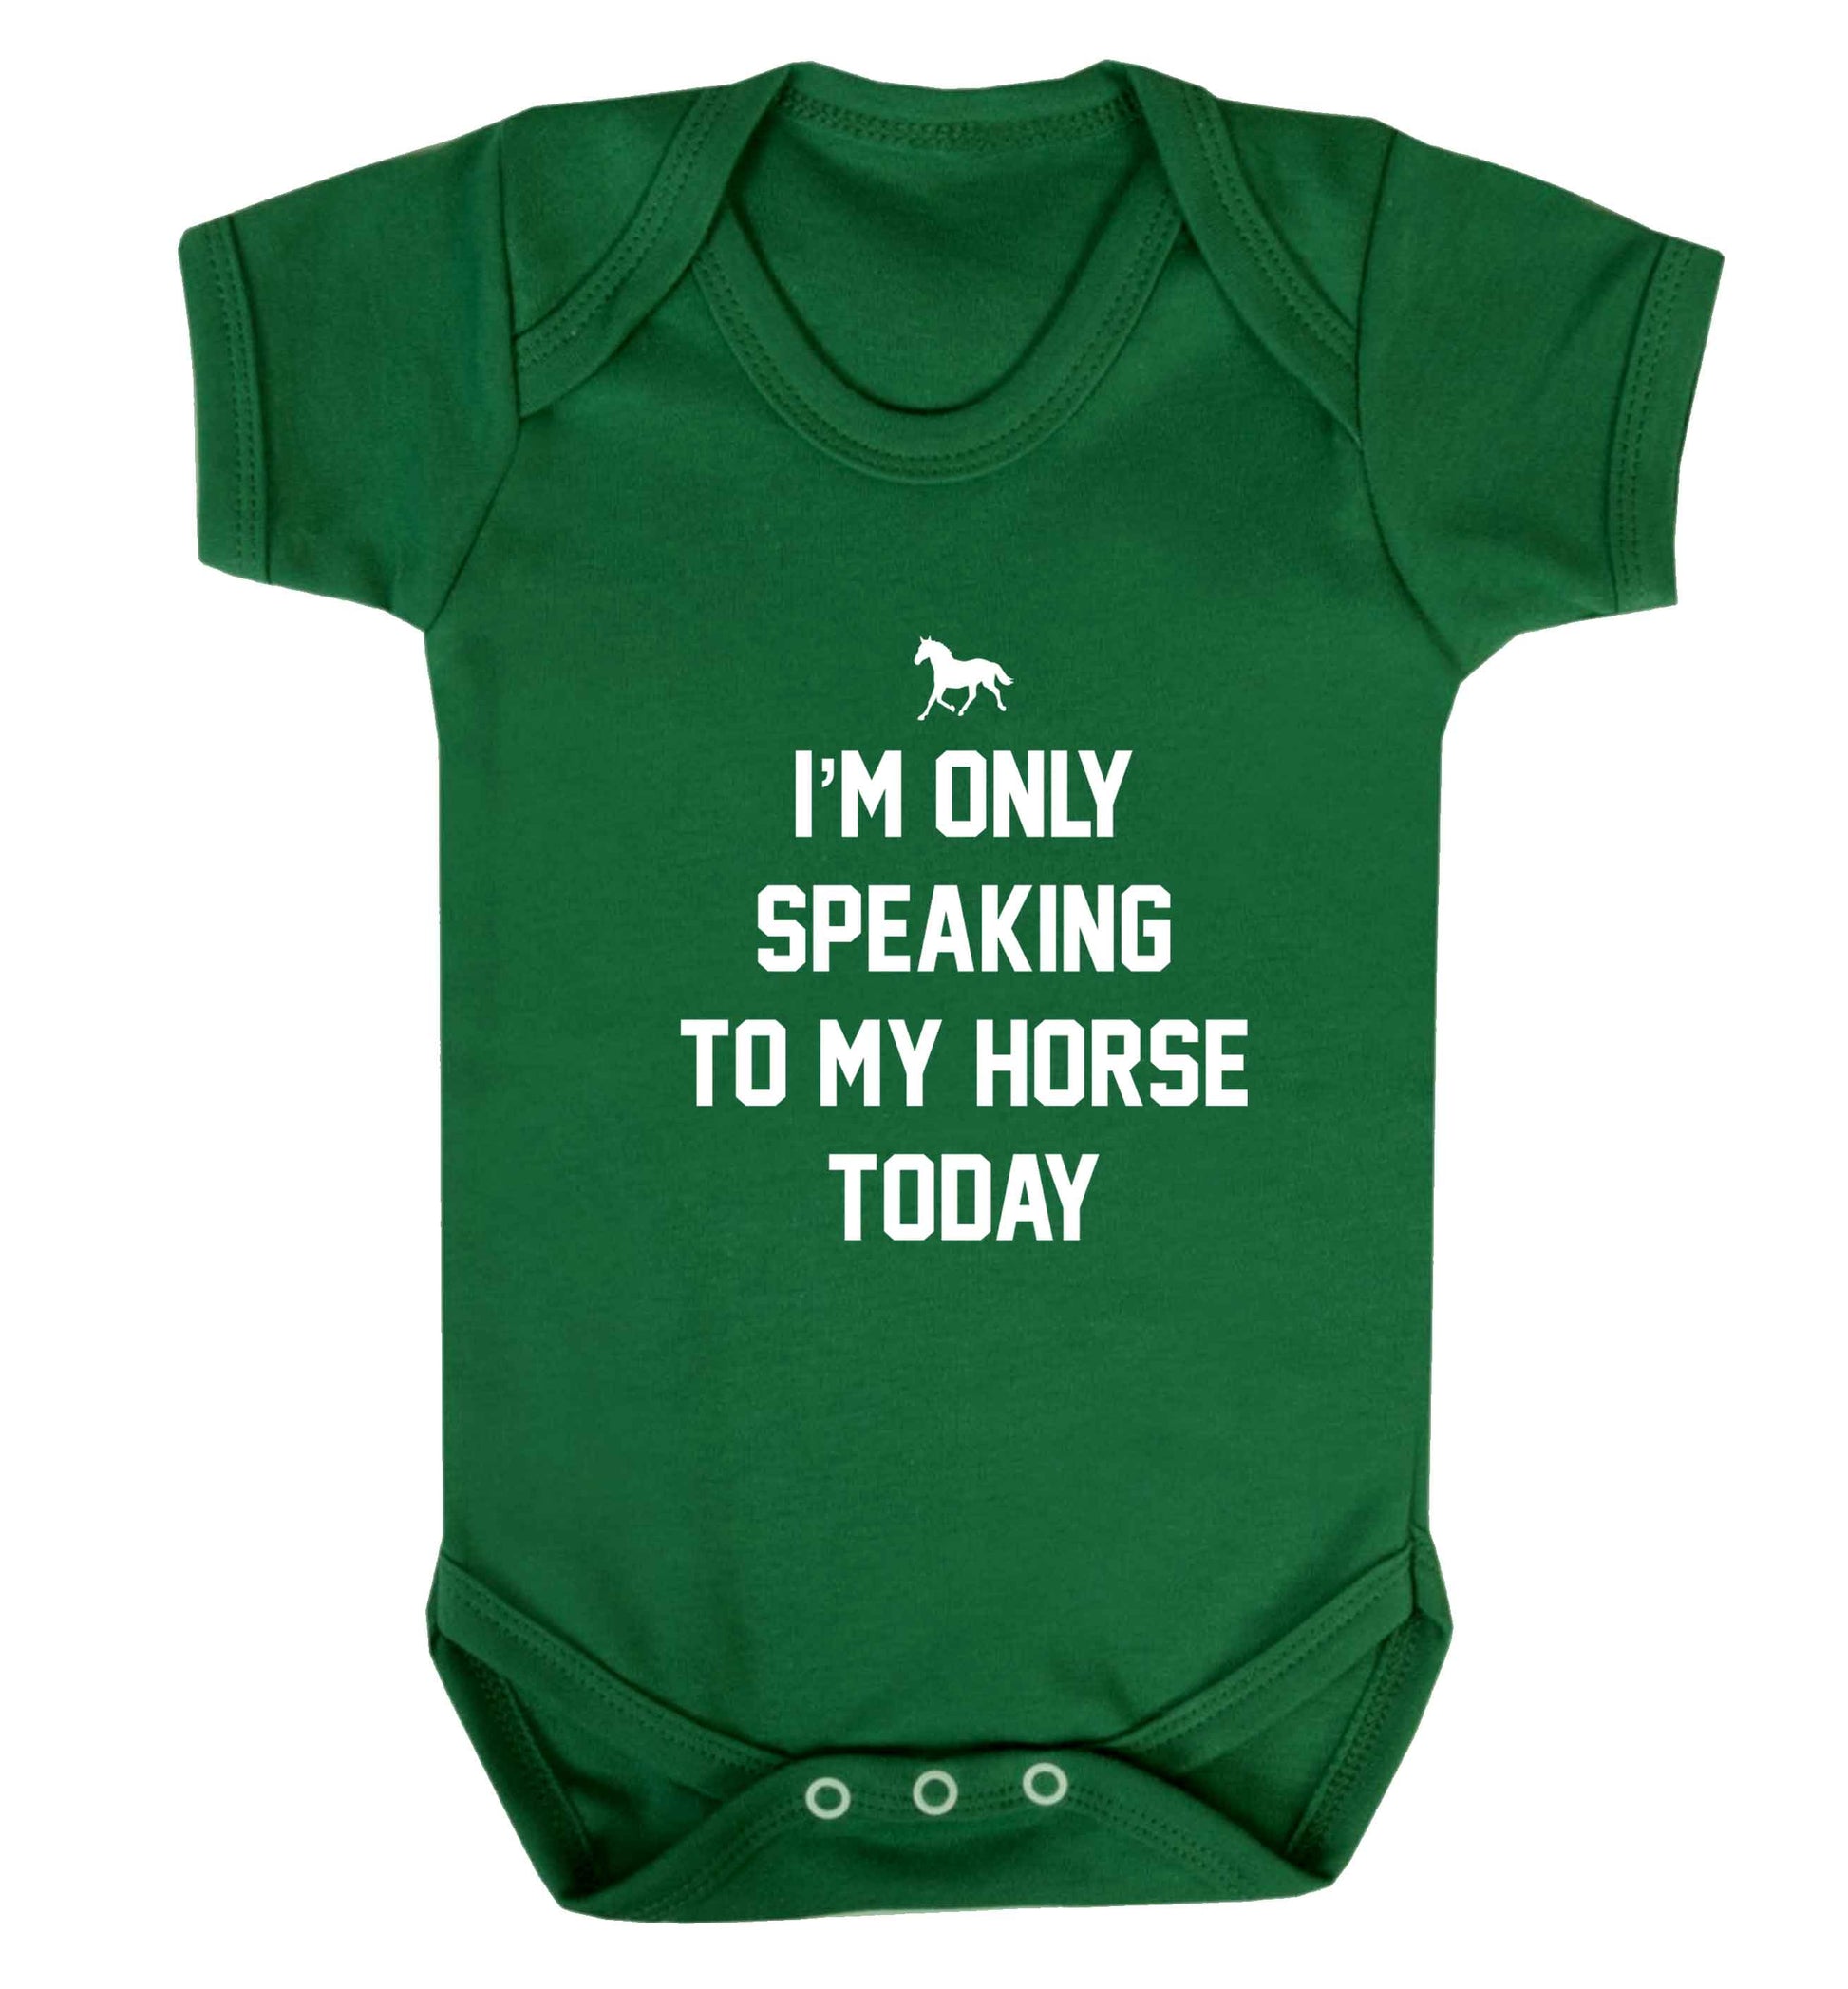 I'm only speaking to my horse today baby vest green 18-24 months